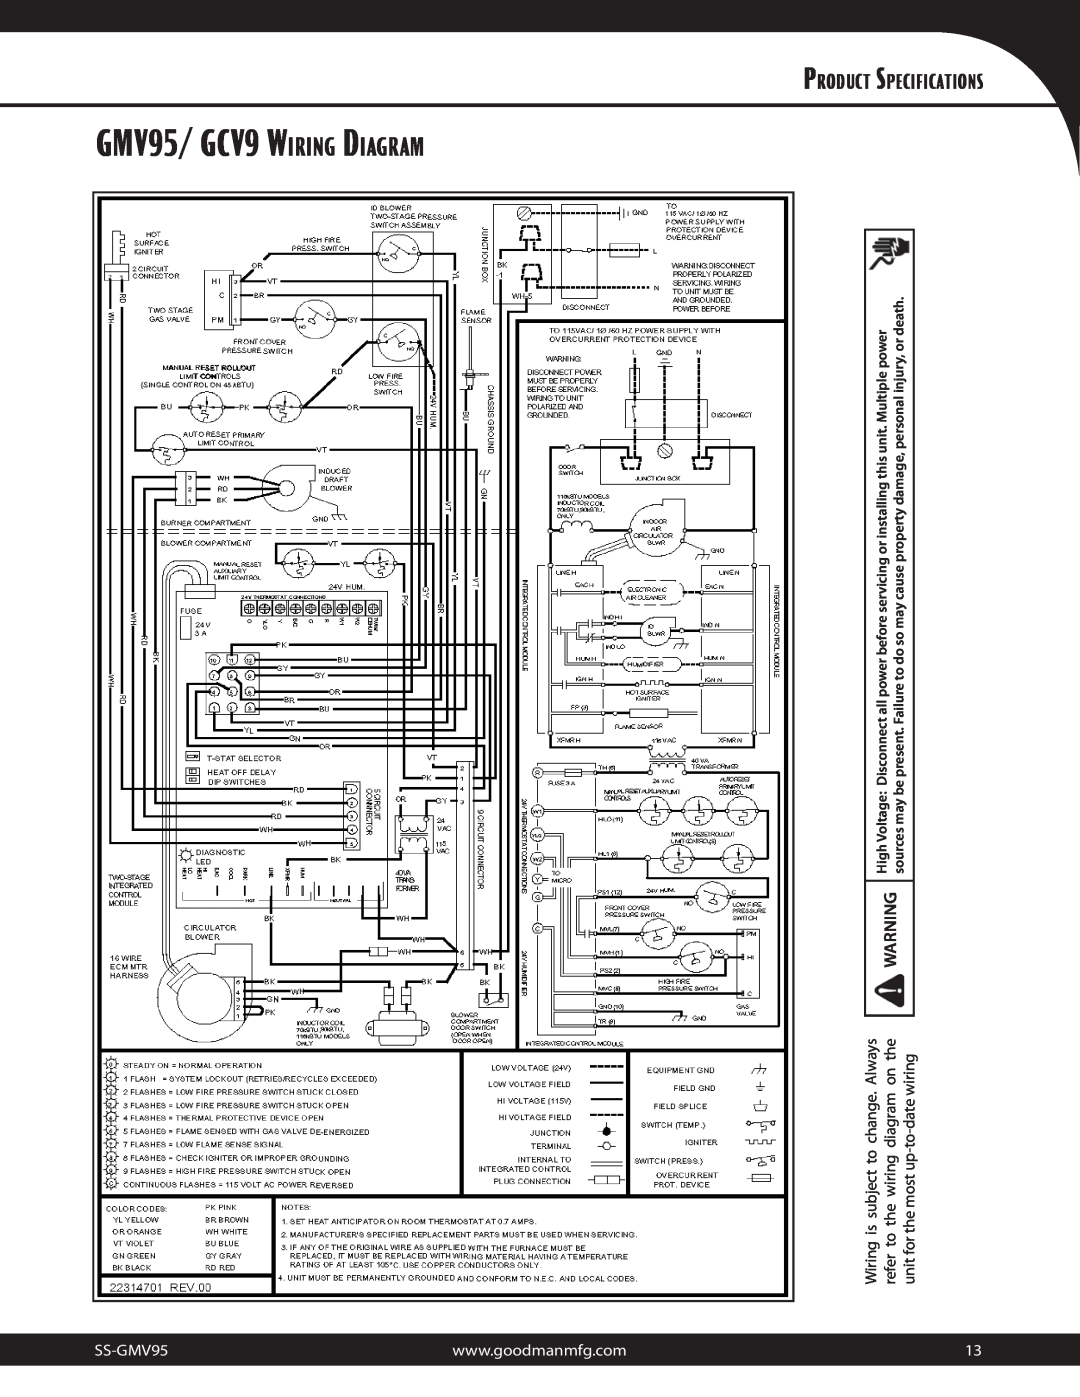 Goodman Mfg Multi-Position, Two-Stage/Variable-Speed Gas Furnace GMV95/ GCV9 WIRING DIAGRAM, Product Specifications 